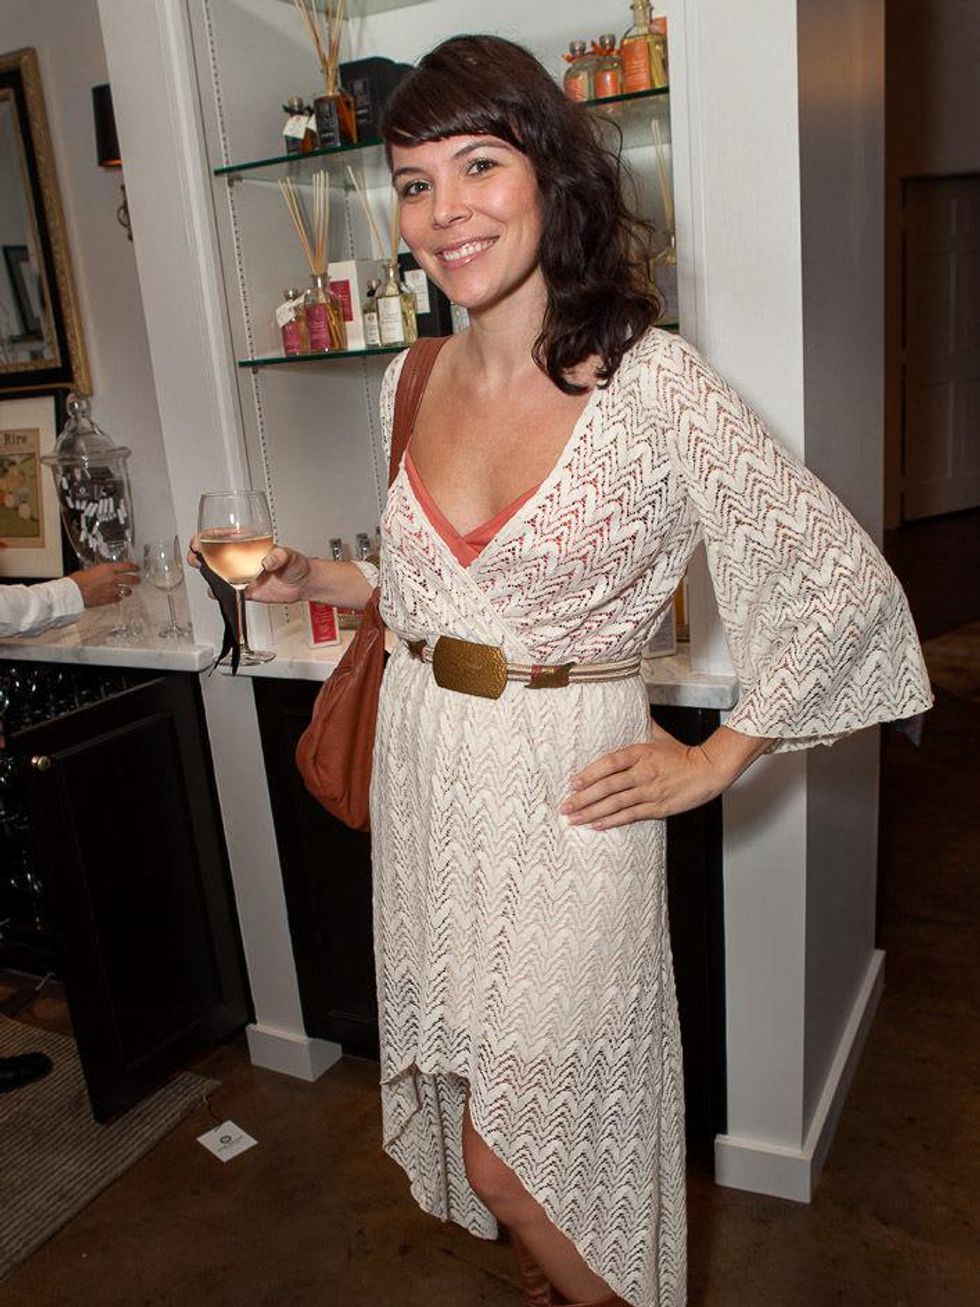 Angilee Burger at the Julie Rhodes Fashion & Home Houston opening party October 2013